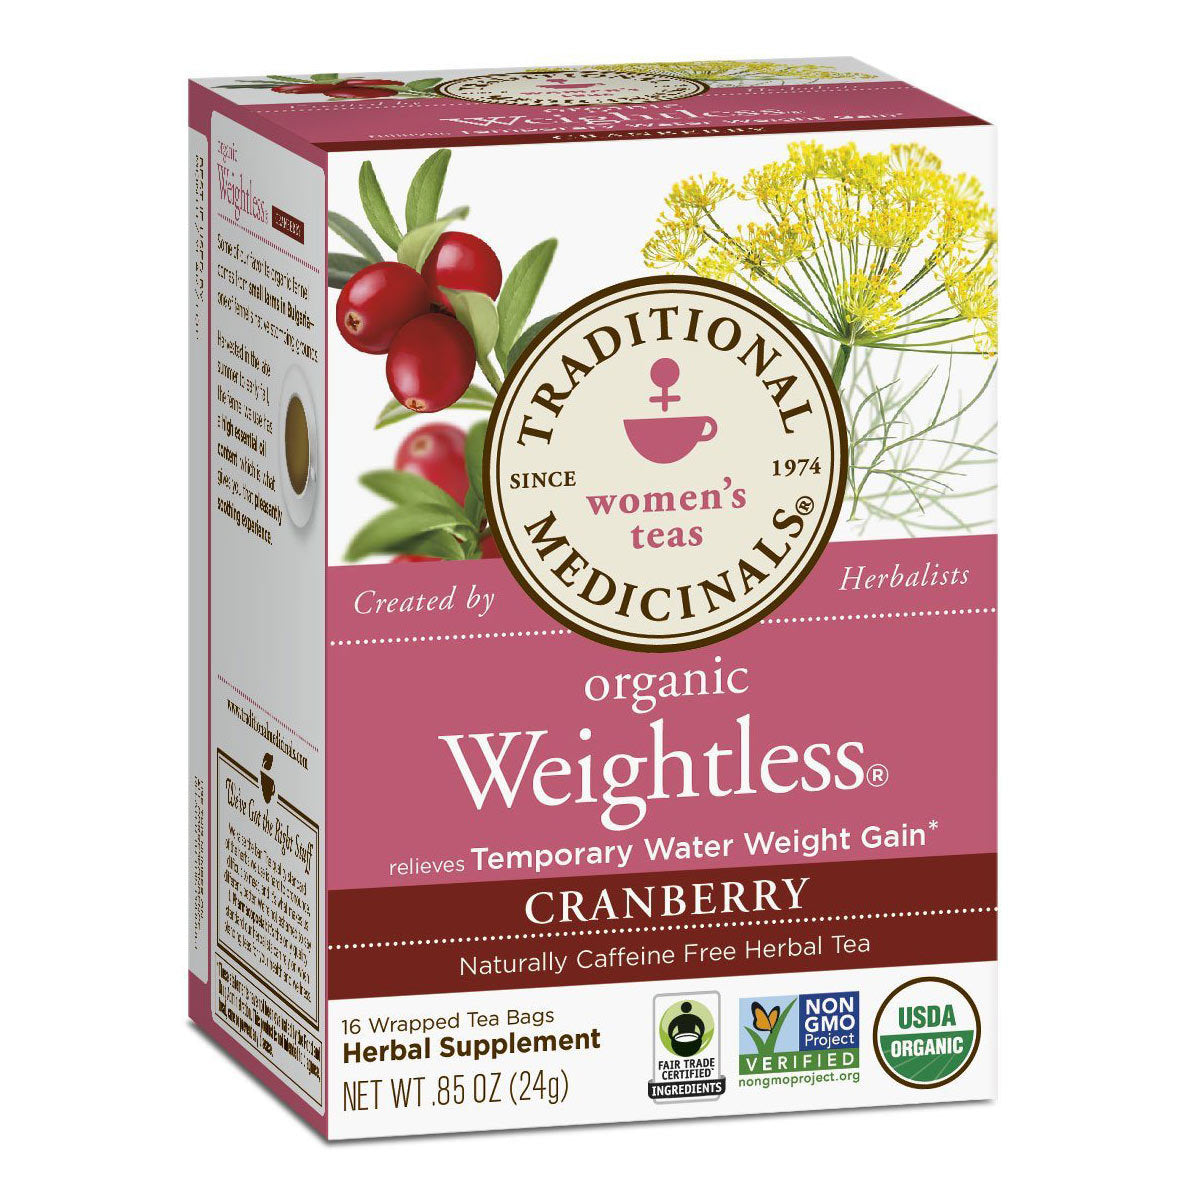 Primary image of Weightless-Cranberry